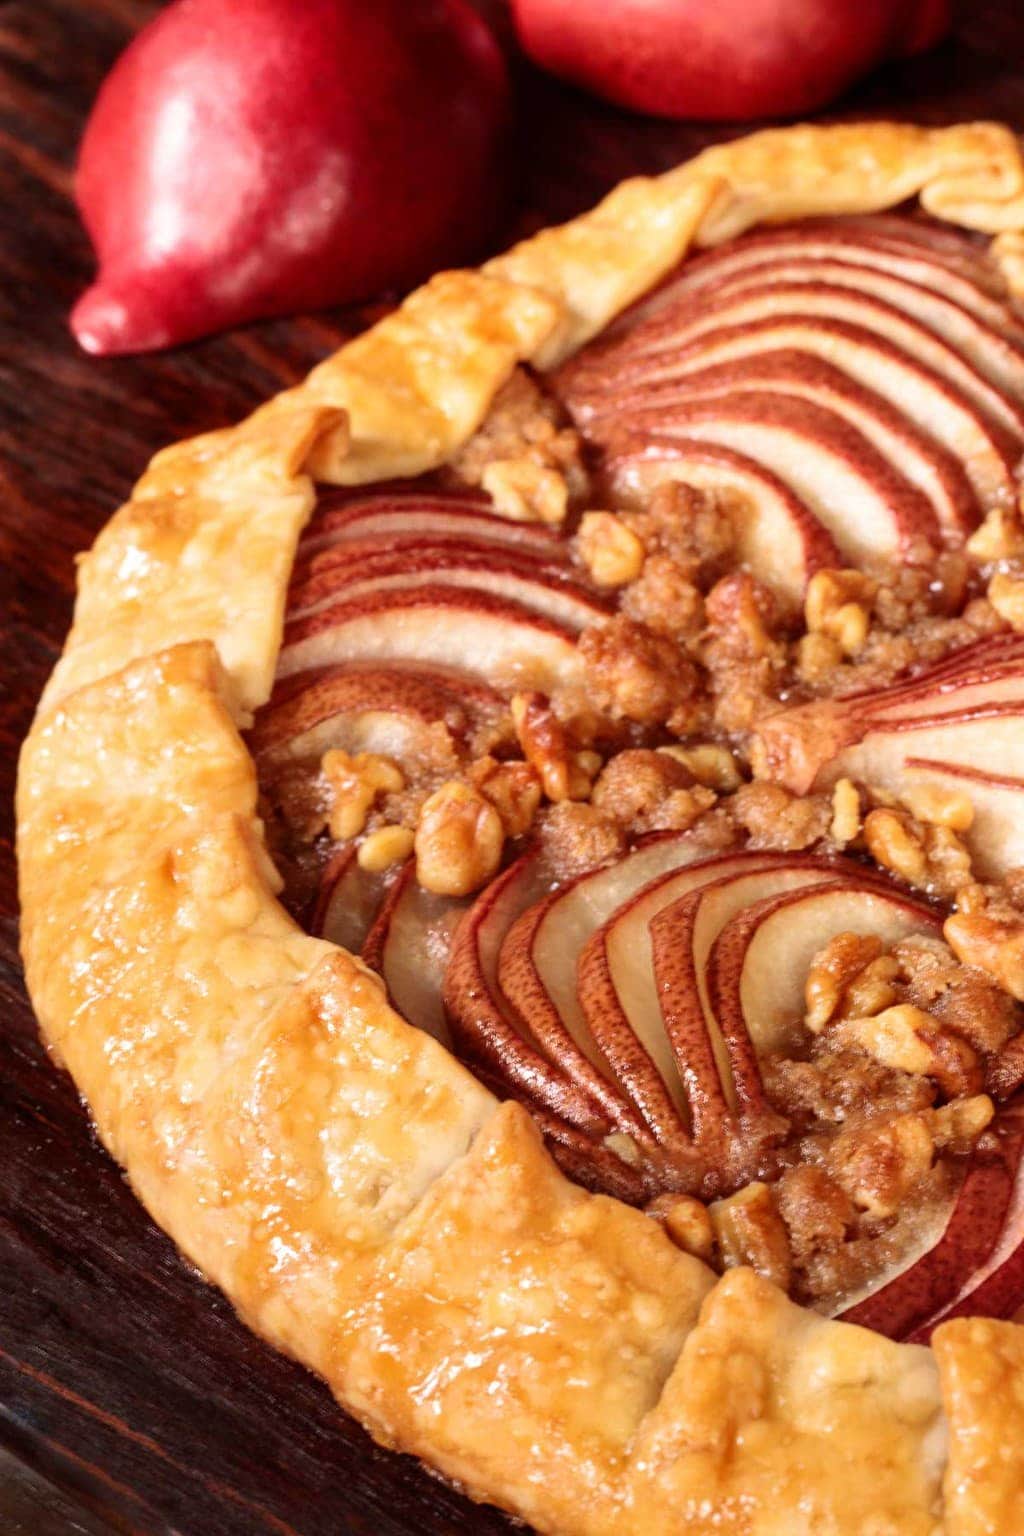 Vertical closeup photo of Maple Glazed Red Pear Galette on a wood surface.